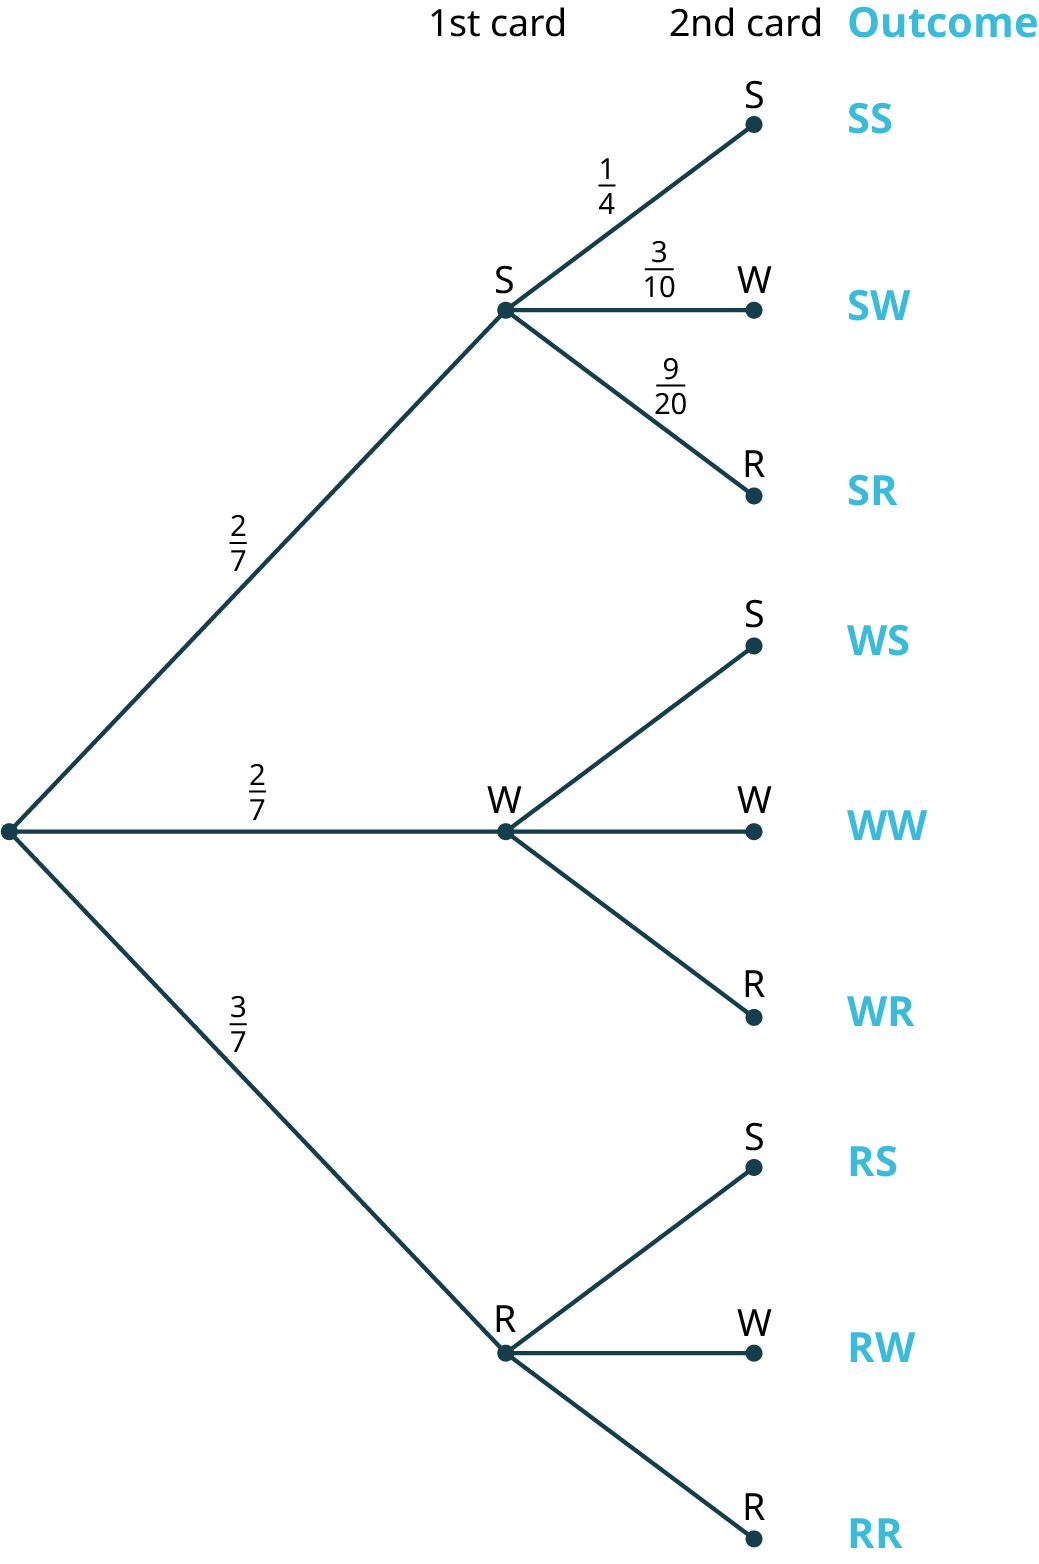 A tree diagram with three stages. The diagram shows a node in the first stage branching into three nodes labeled S, W, and R in the second stage with the probabilities, two-sevenths, two-sevenths, and three-sevenths, respectively. The second stage represents the first card. The third stage representing the second card is as follows. Node, S branches into three nodes labeled S, W, and R with the probabilities, one-fourth, three-tenths, and nine-twentieths. Node, W branches into three nodes labeled S, W, and R. The node, R branches into three nodes labeled S, W, and R. The possible outcomes are as follows: S S, S W, S R, W S, W W, W R, R S, R W, and R R.